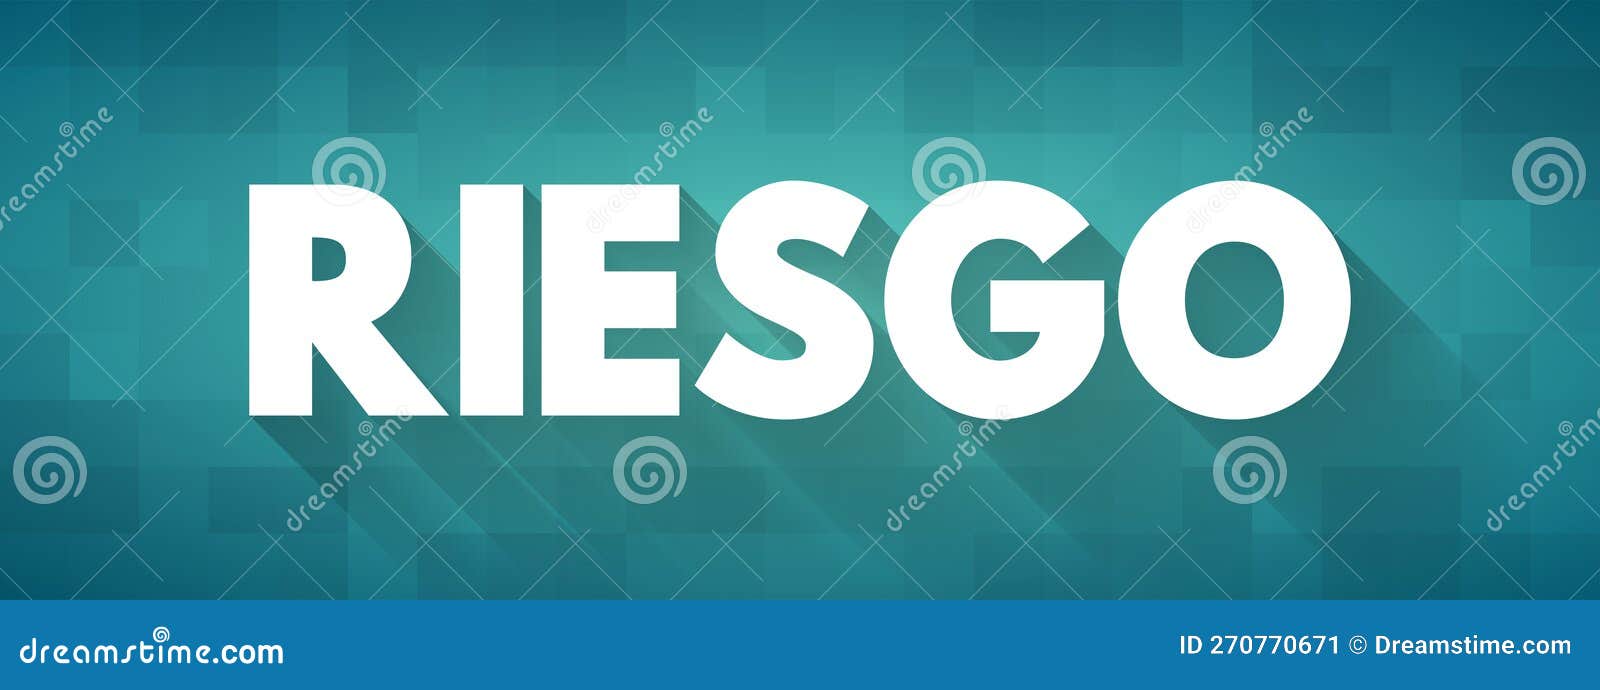 riesgo (spanish words for risk) text quote, concept background